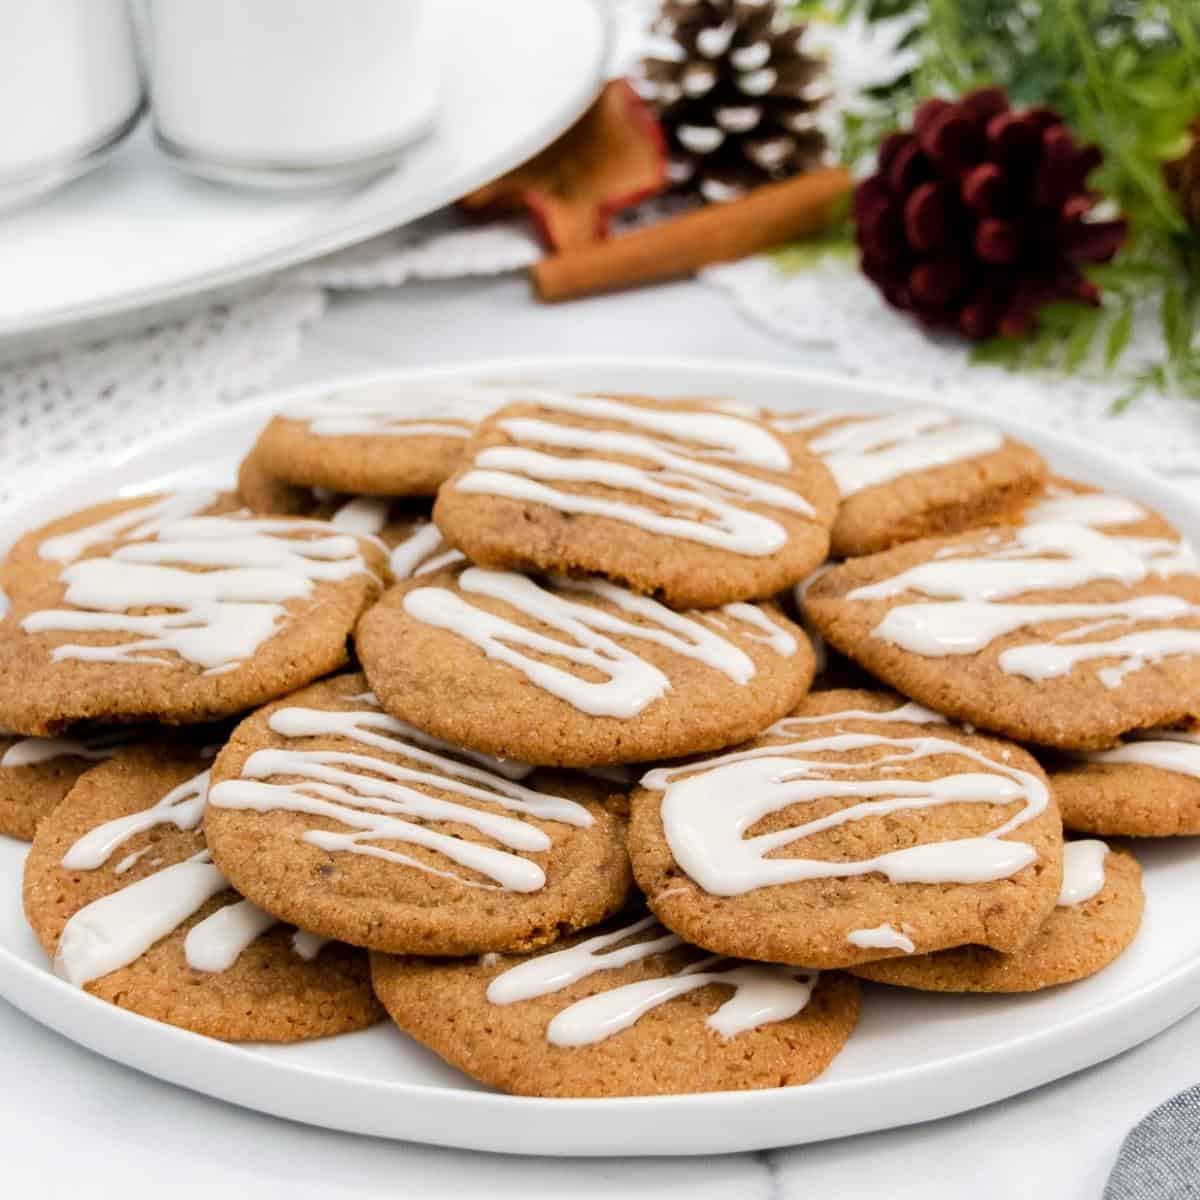 Soft gingerbread cookies on a plate featured image.